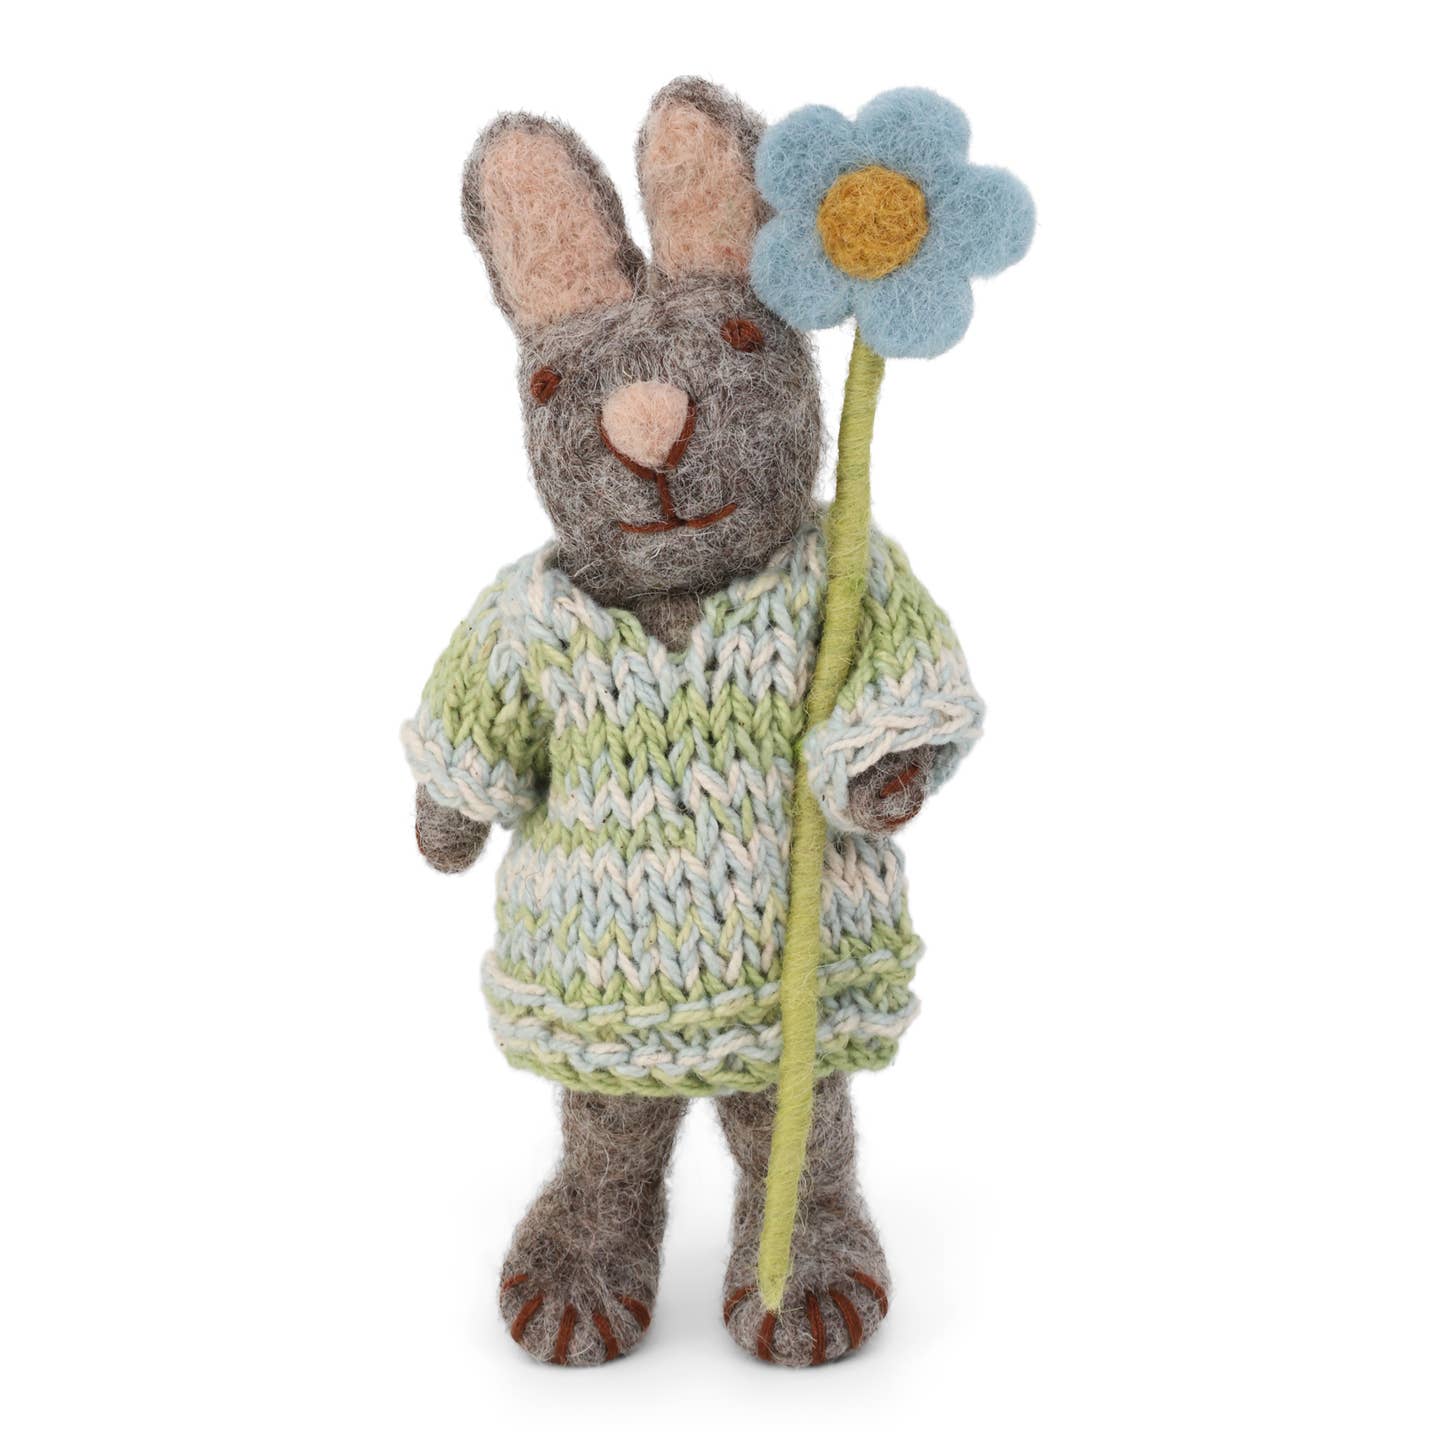 Gry & Sif Felt Small Grey Bunny - Dress and Blue Anemone